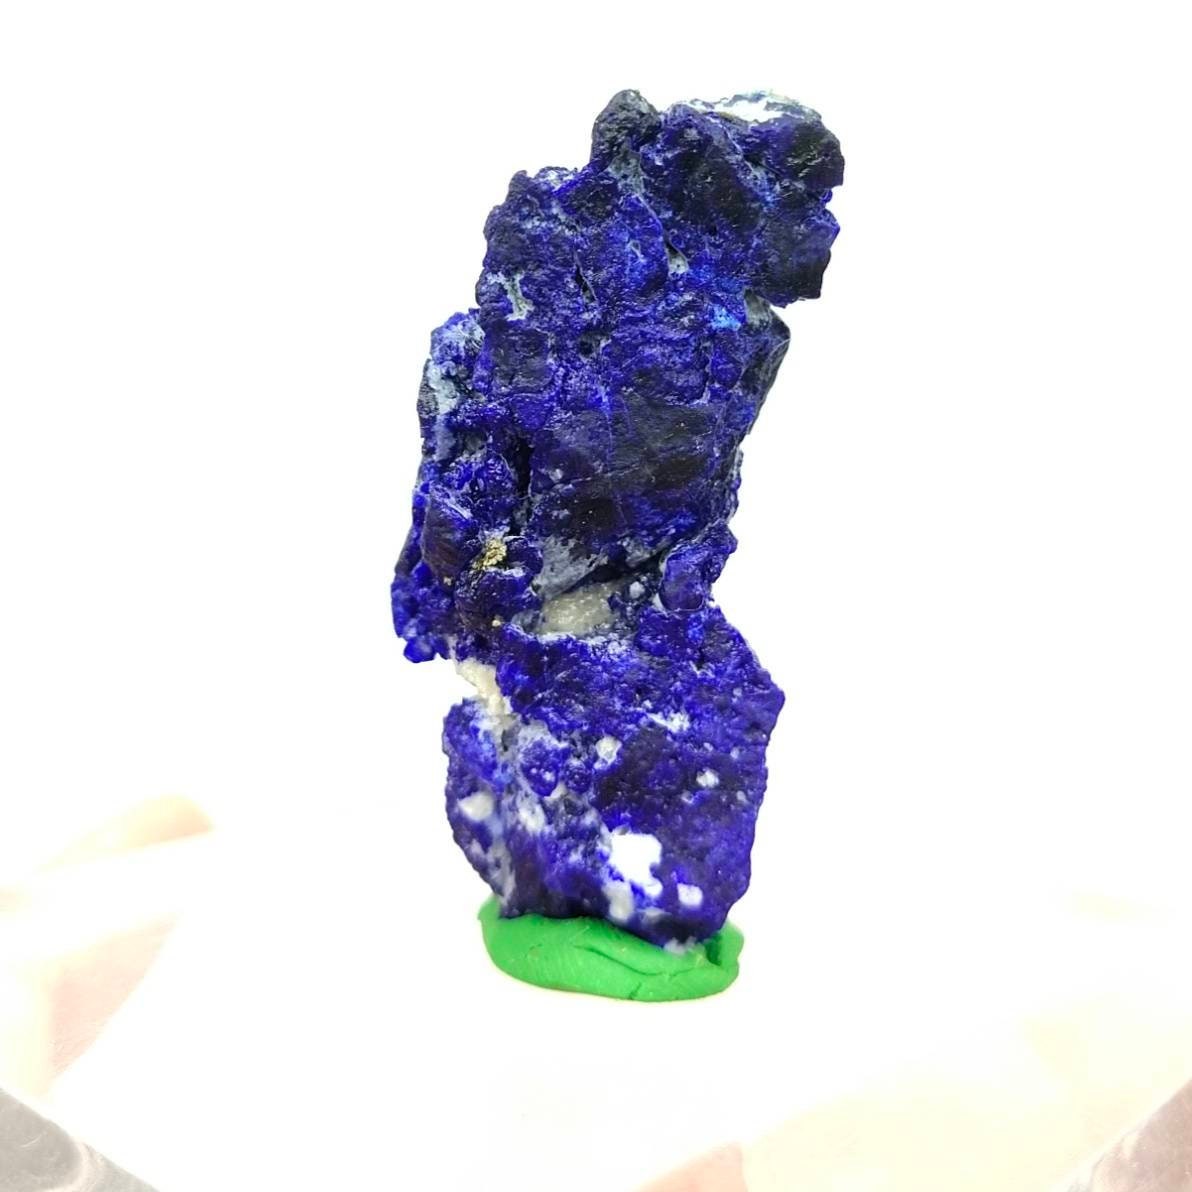 ARSAA GEMS AND MINERALSAfghan hayune var lazurite crystal with rich blue color from Afghanistan, 13.8 grams - Premium  from ARSAA GEMS AND MINERALS - Just $70.00! Shop now at ARSAA GEMS AND MINERALS